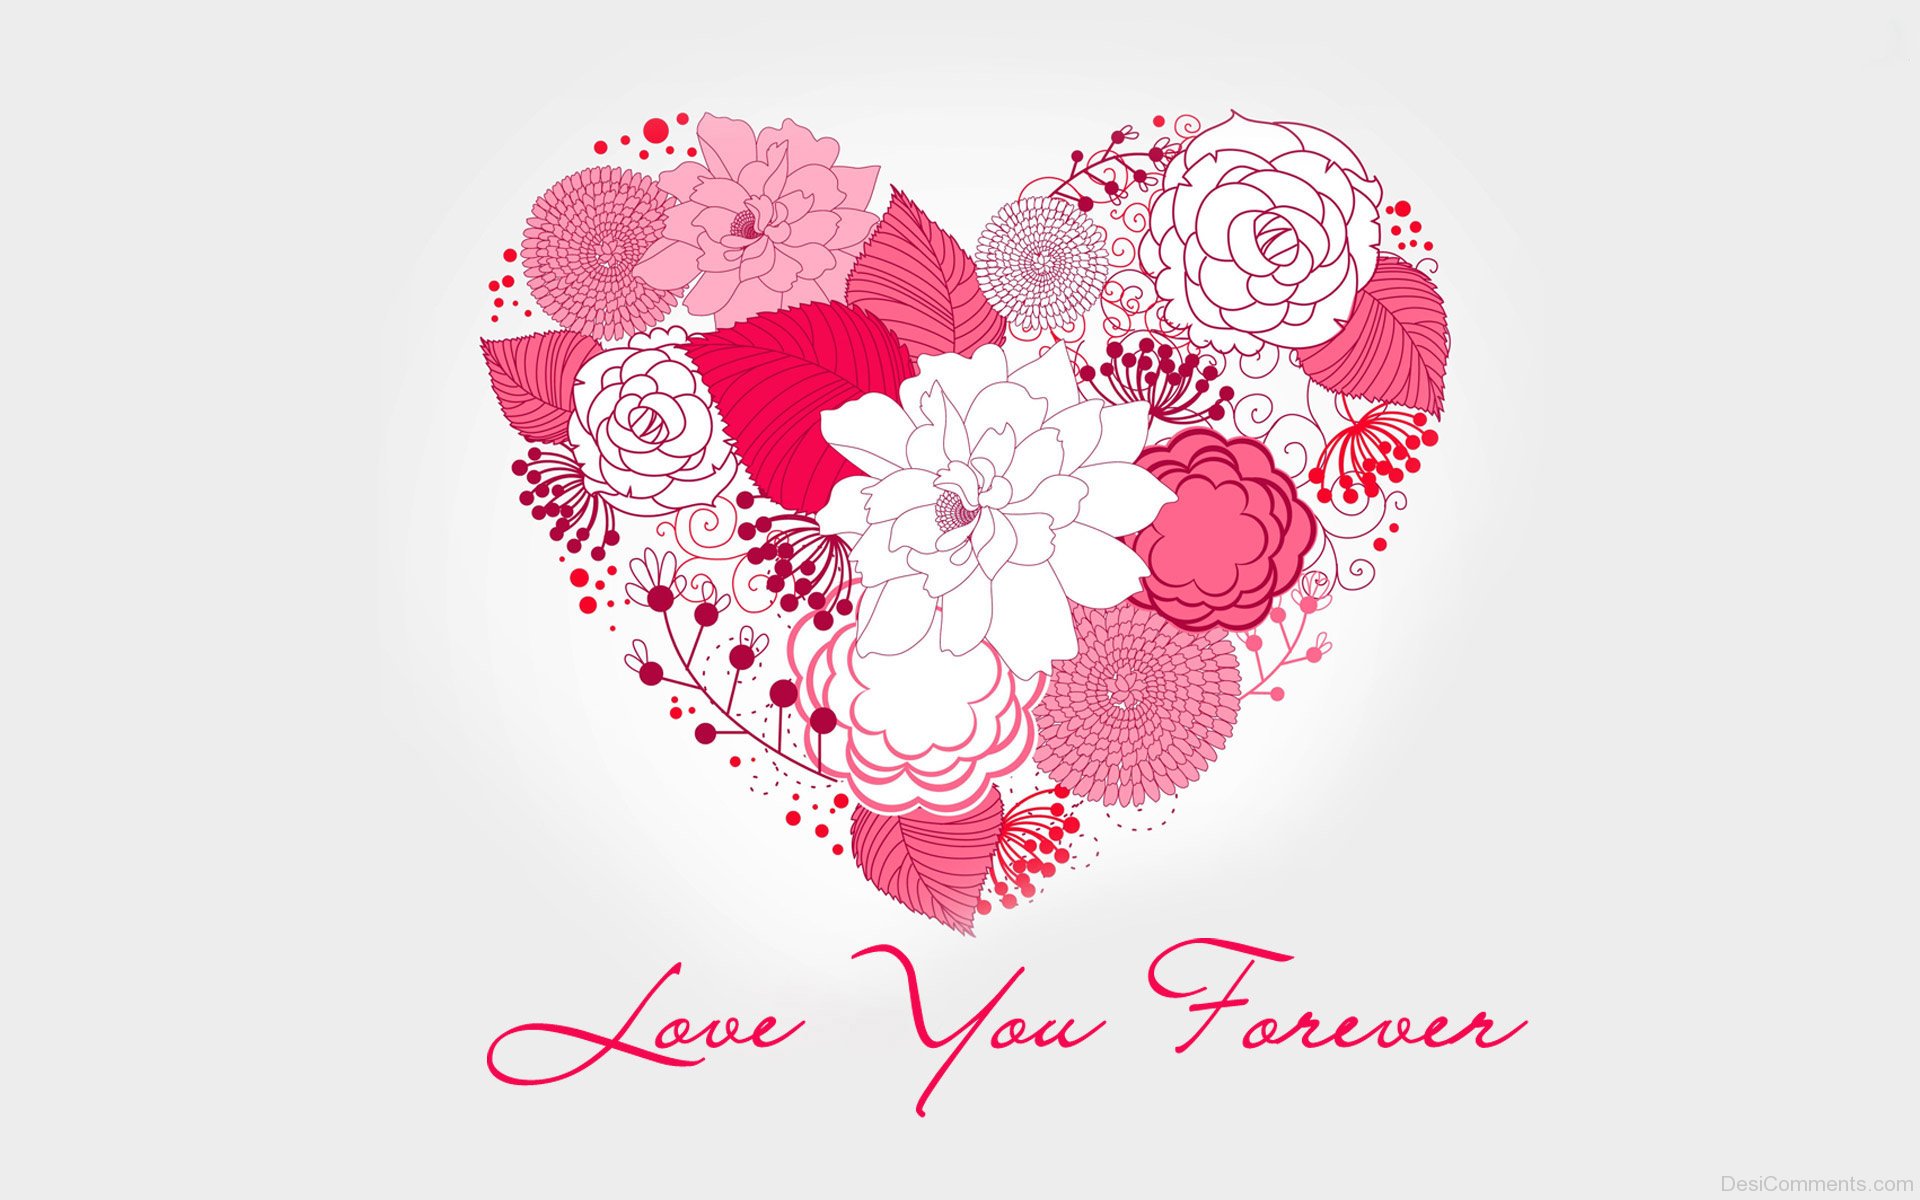 Love You Forever From Heart - DesiComments.com